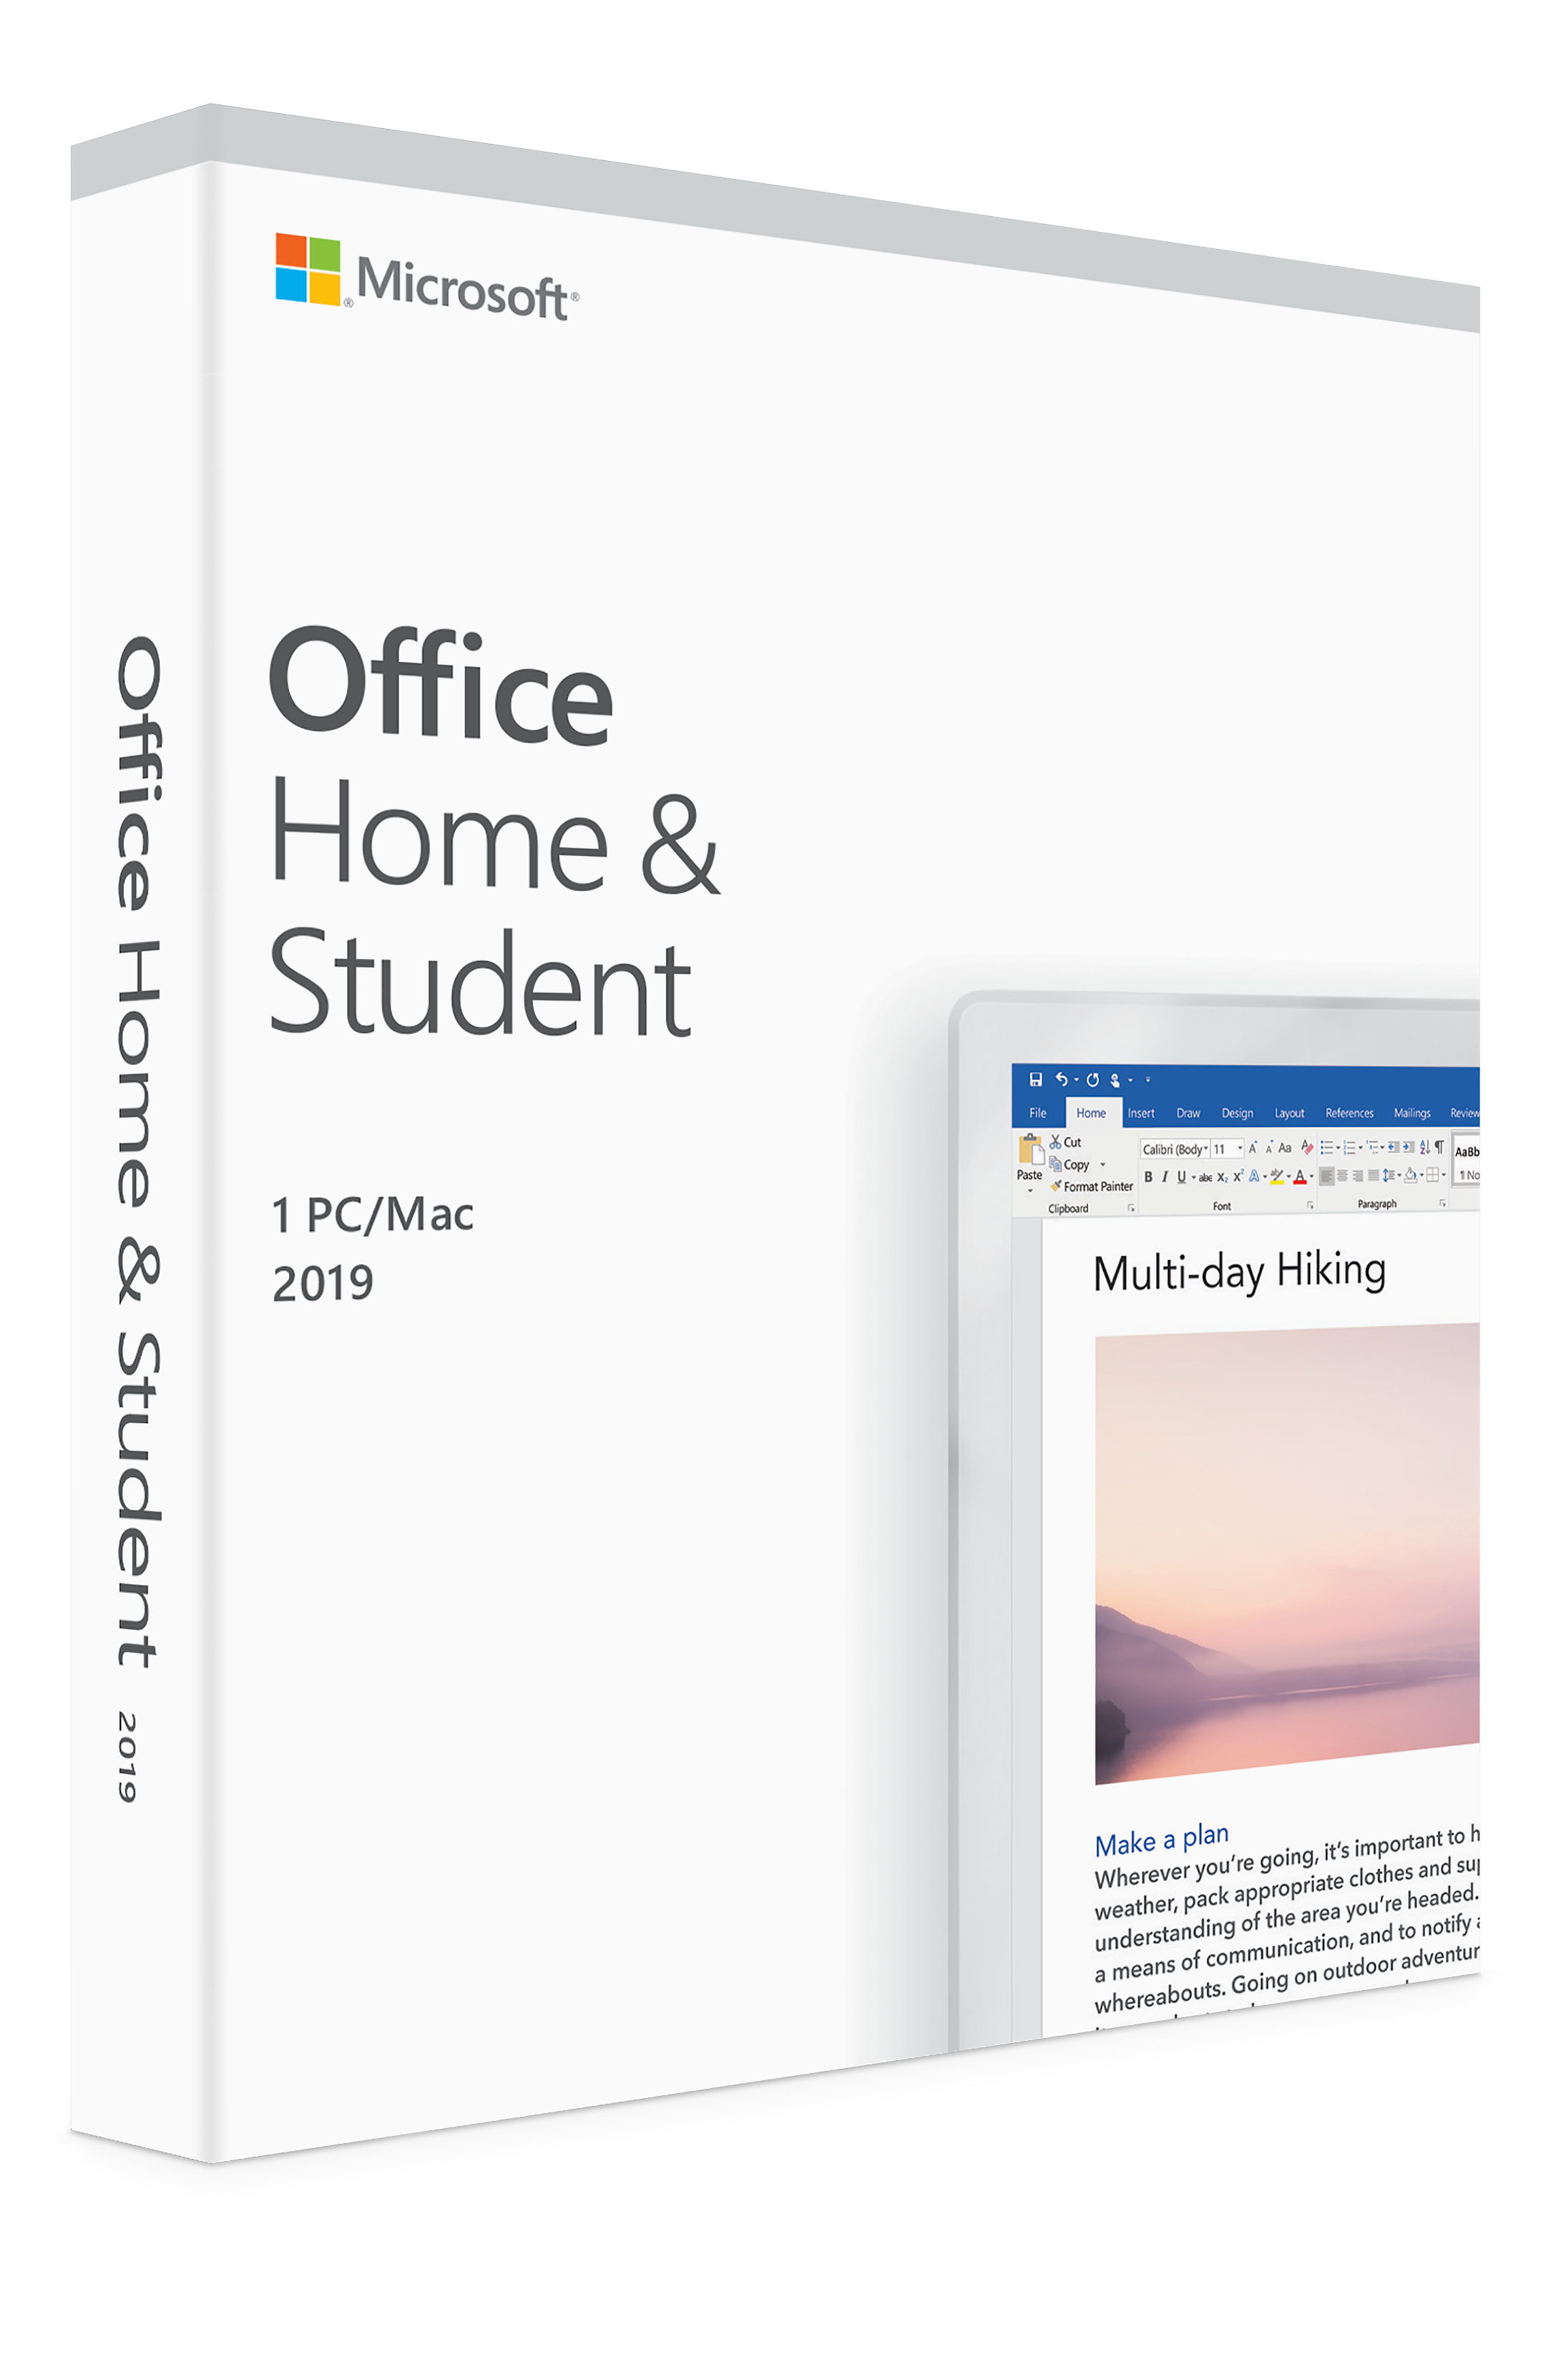 Microsoft Office Home & Student 2019 - ITLinks Computers Maitland